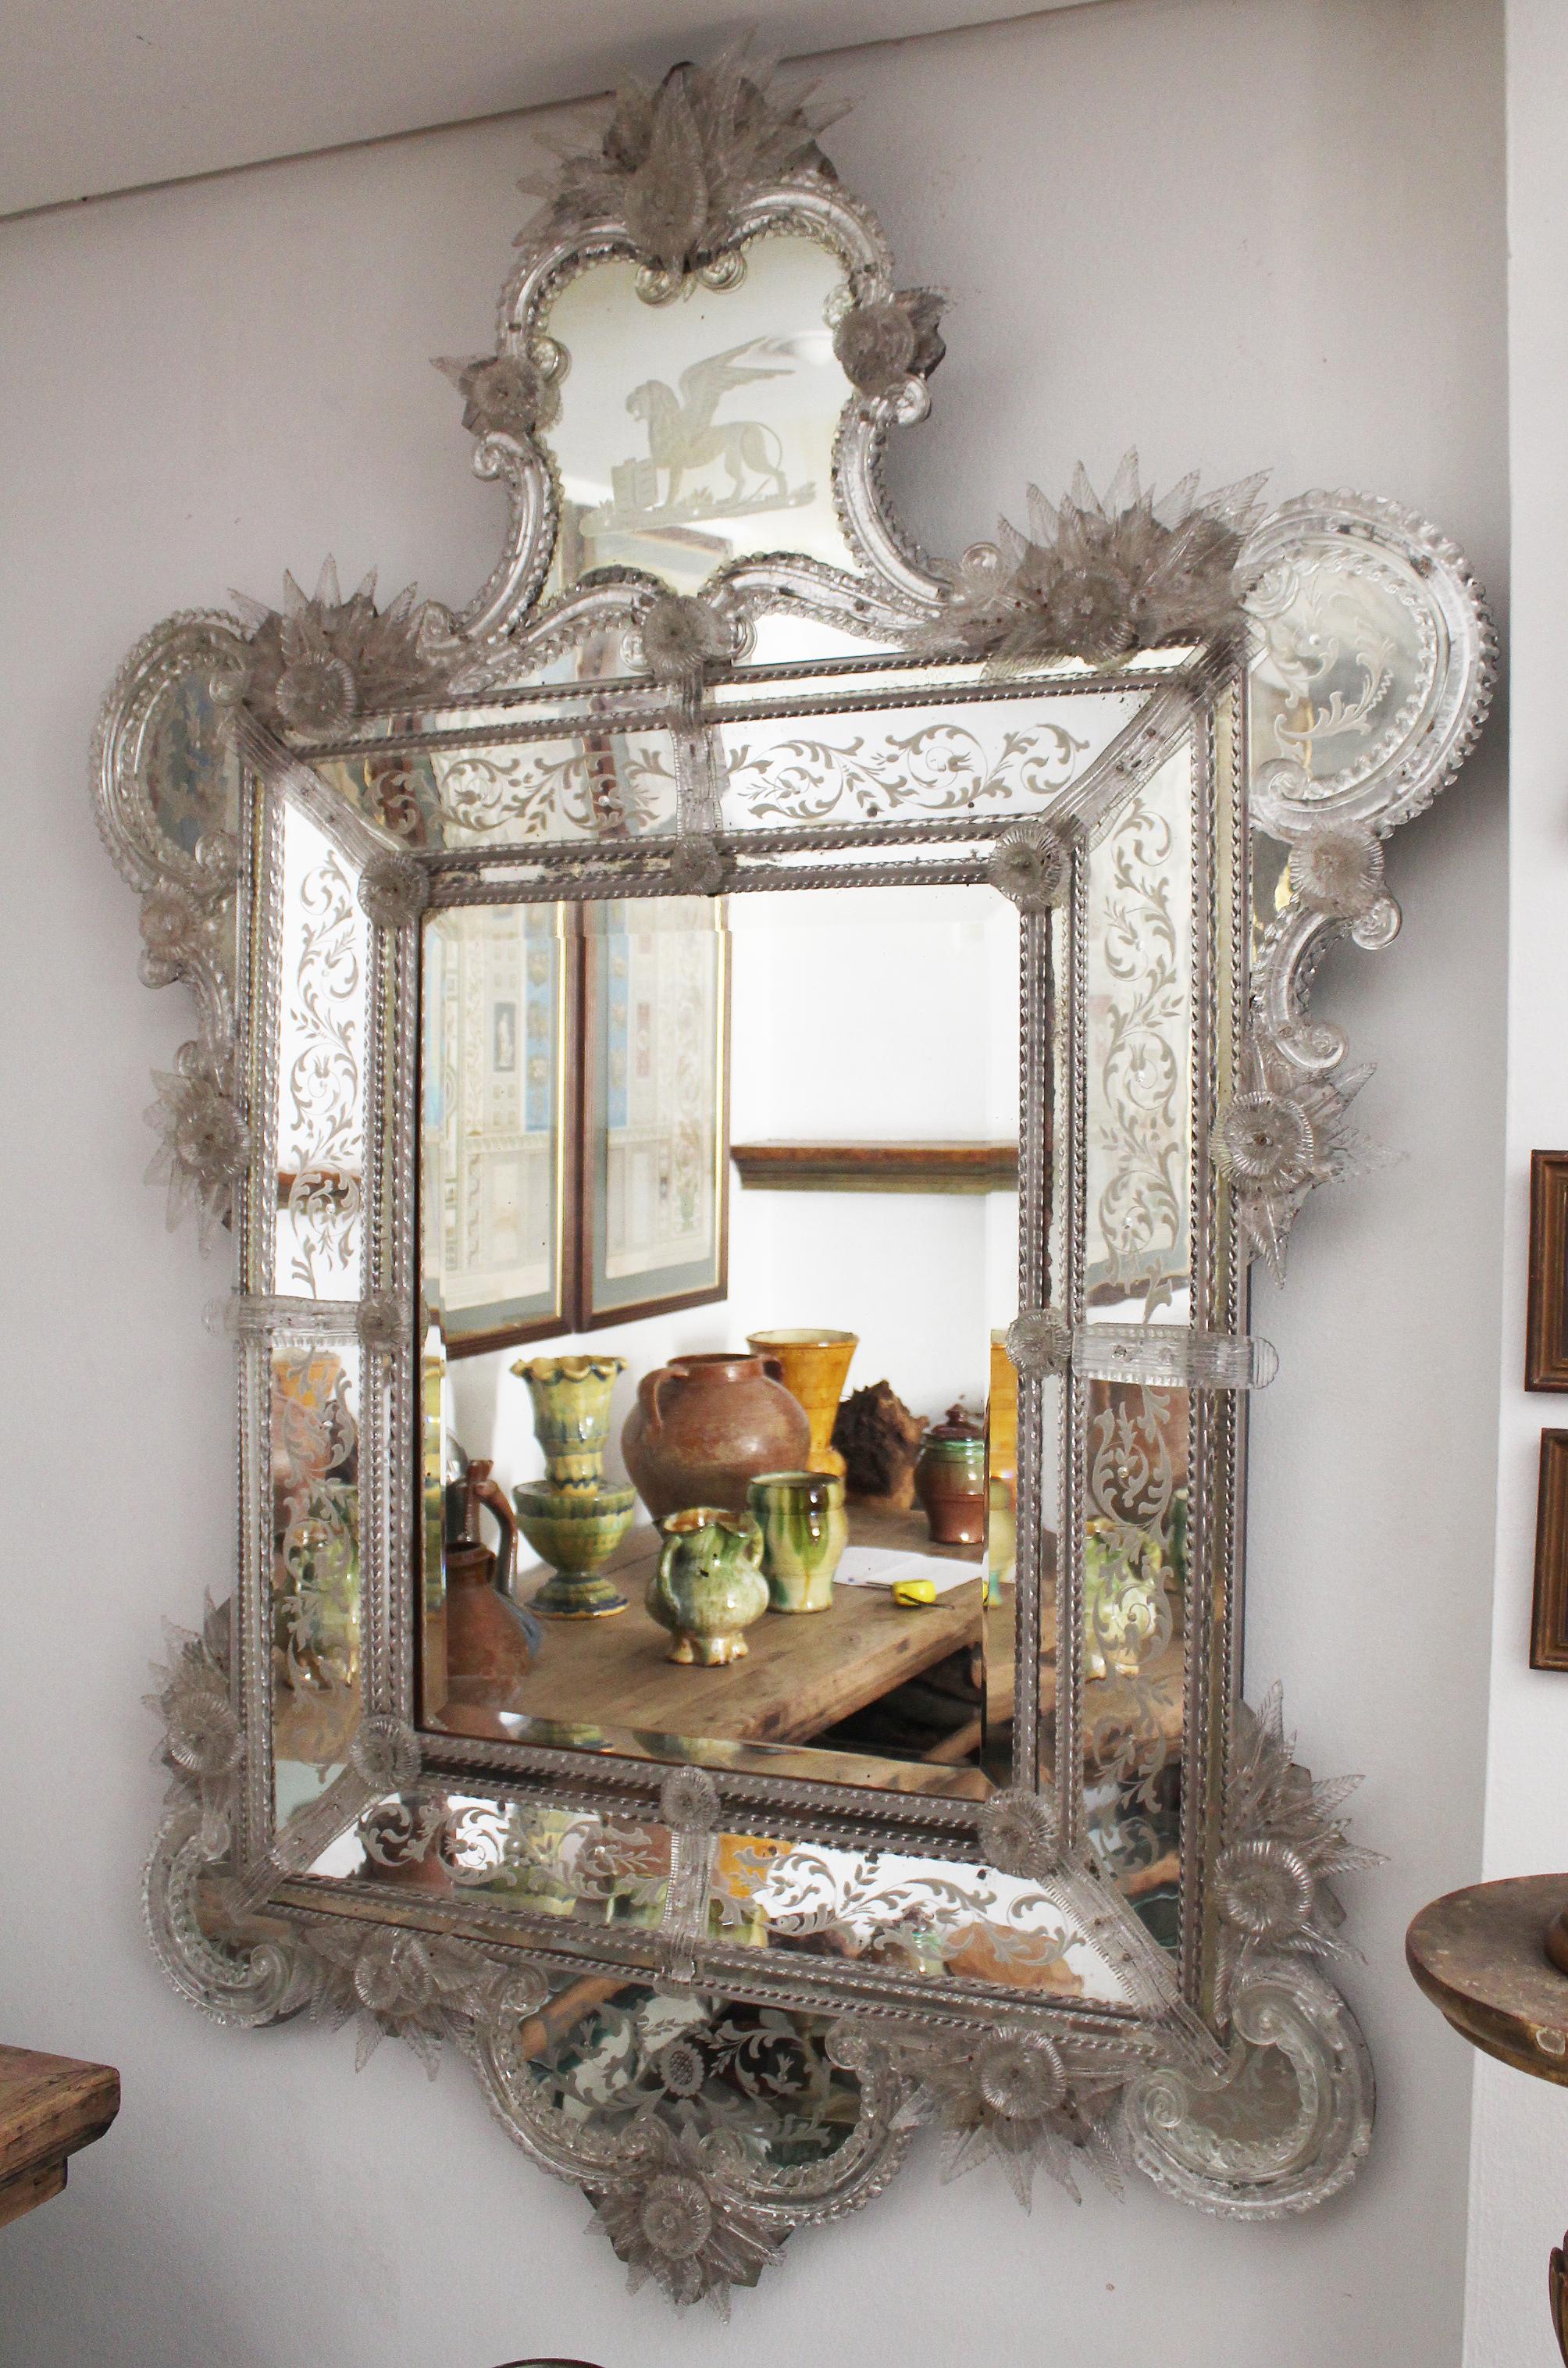 19th century Venetian mirror profusely decorated with floral motifs. Great quality mirror carvings and crystal pieces.